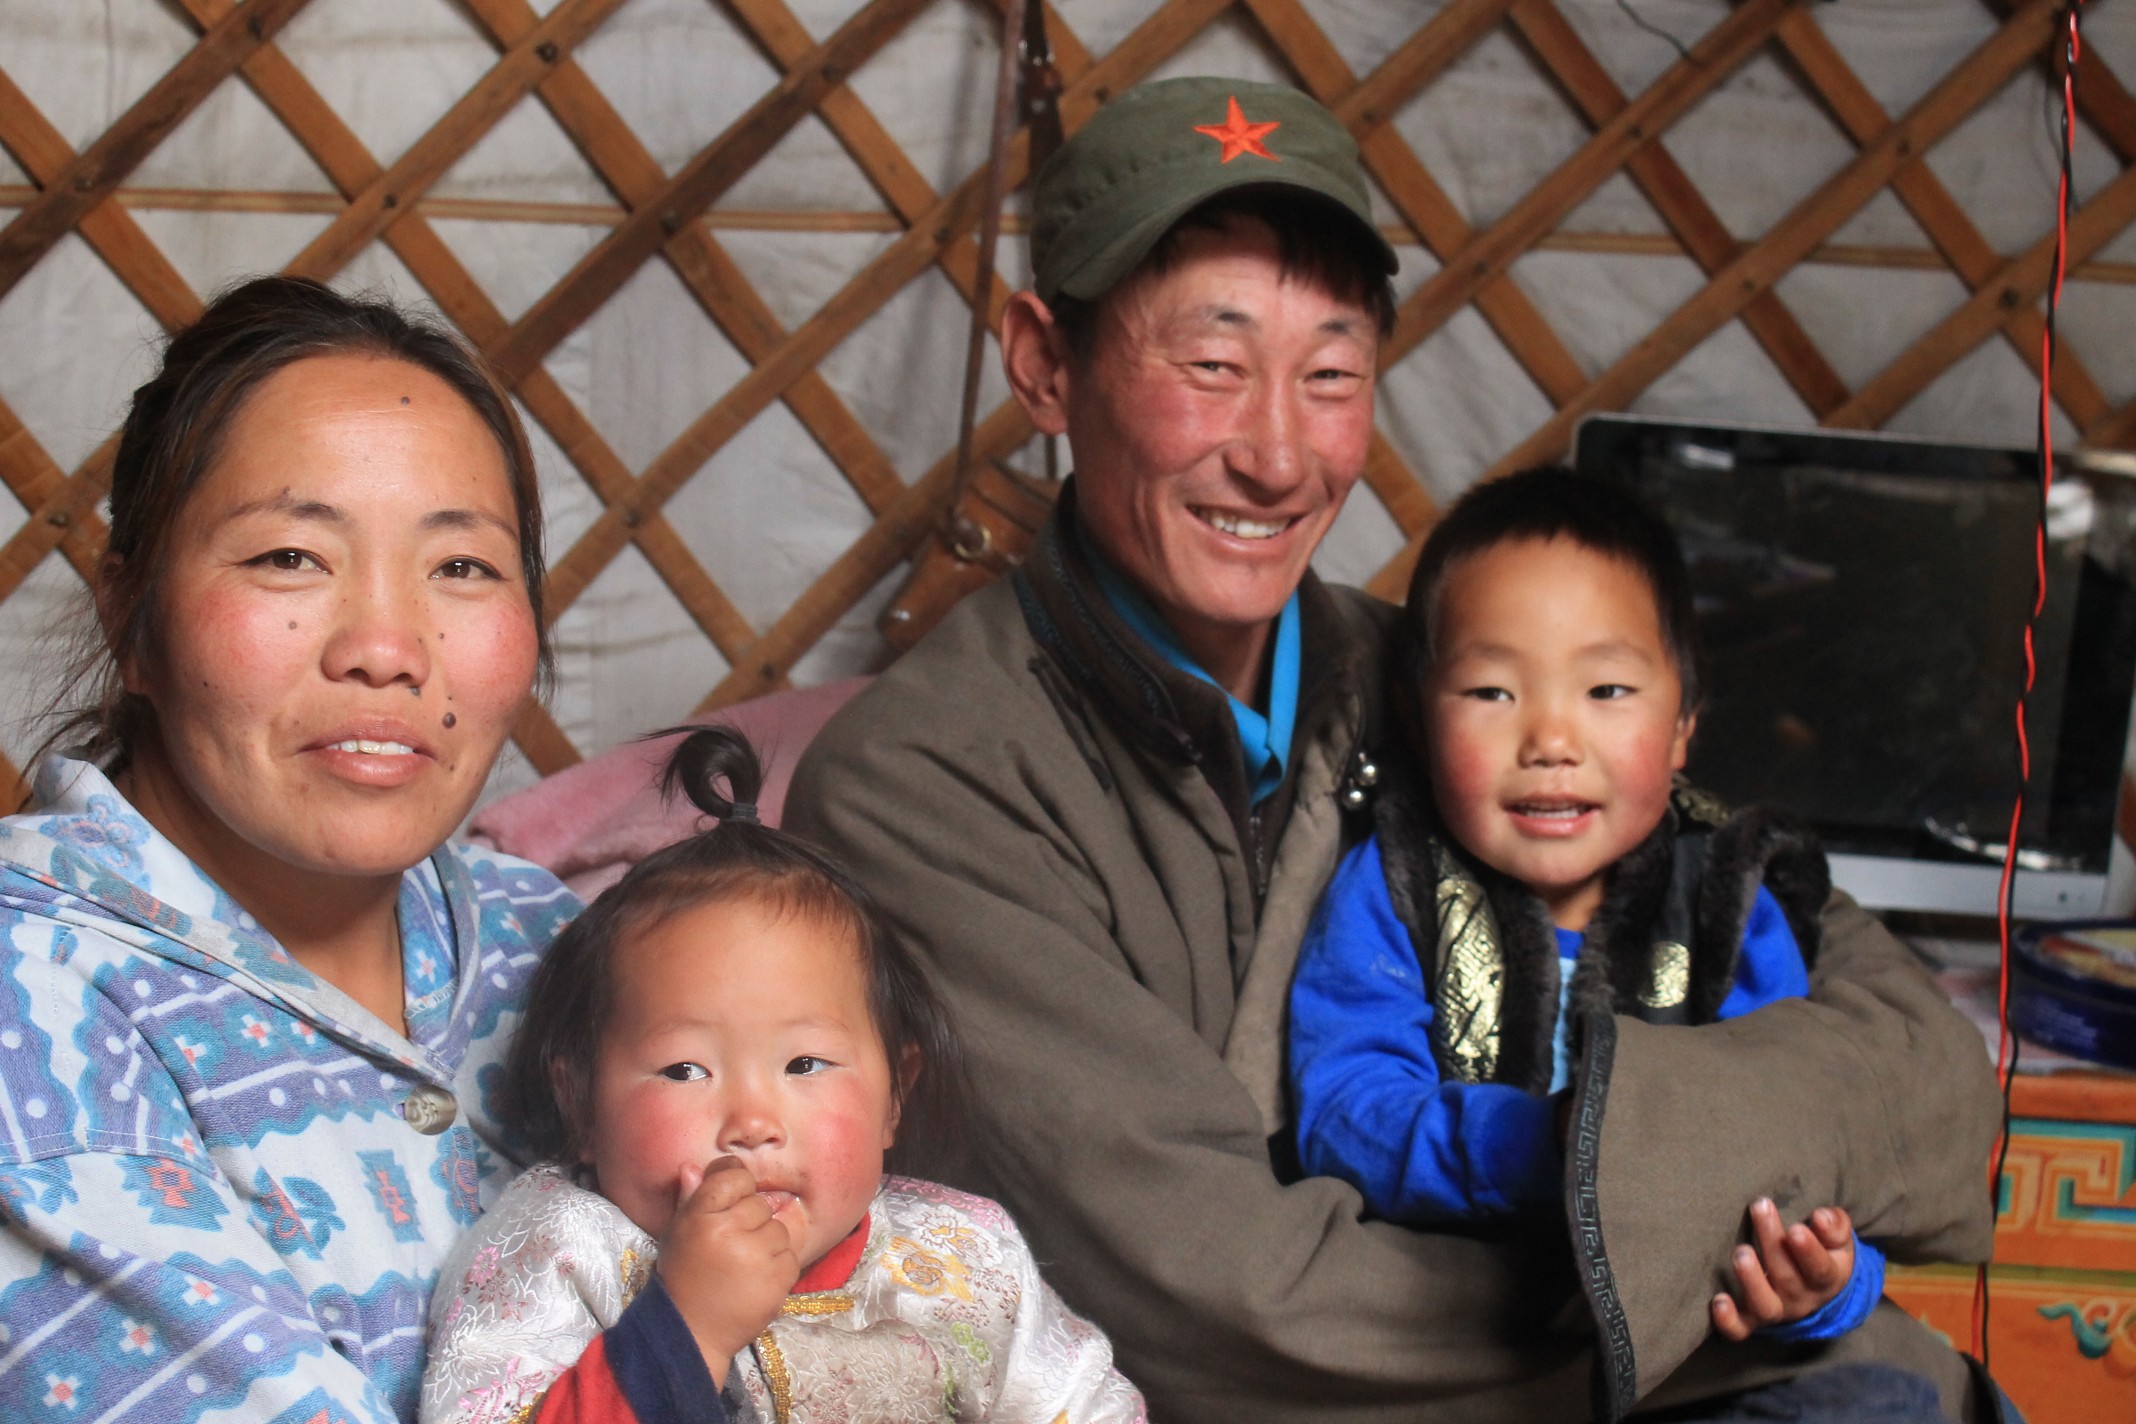 This is the young Galbadrakh family. They’re young, focused and yet the traditions of Mongolia run deep with them and their way of life in the Khangai Mountains in central Mongolia.